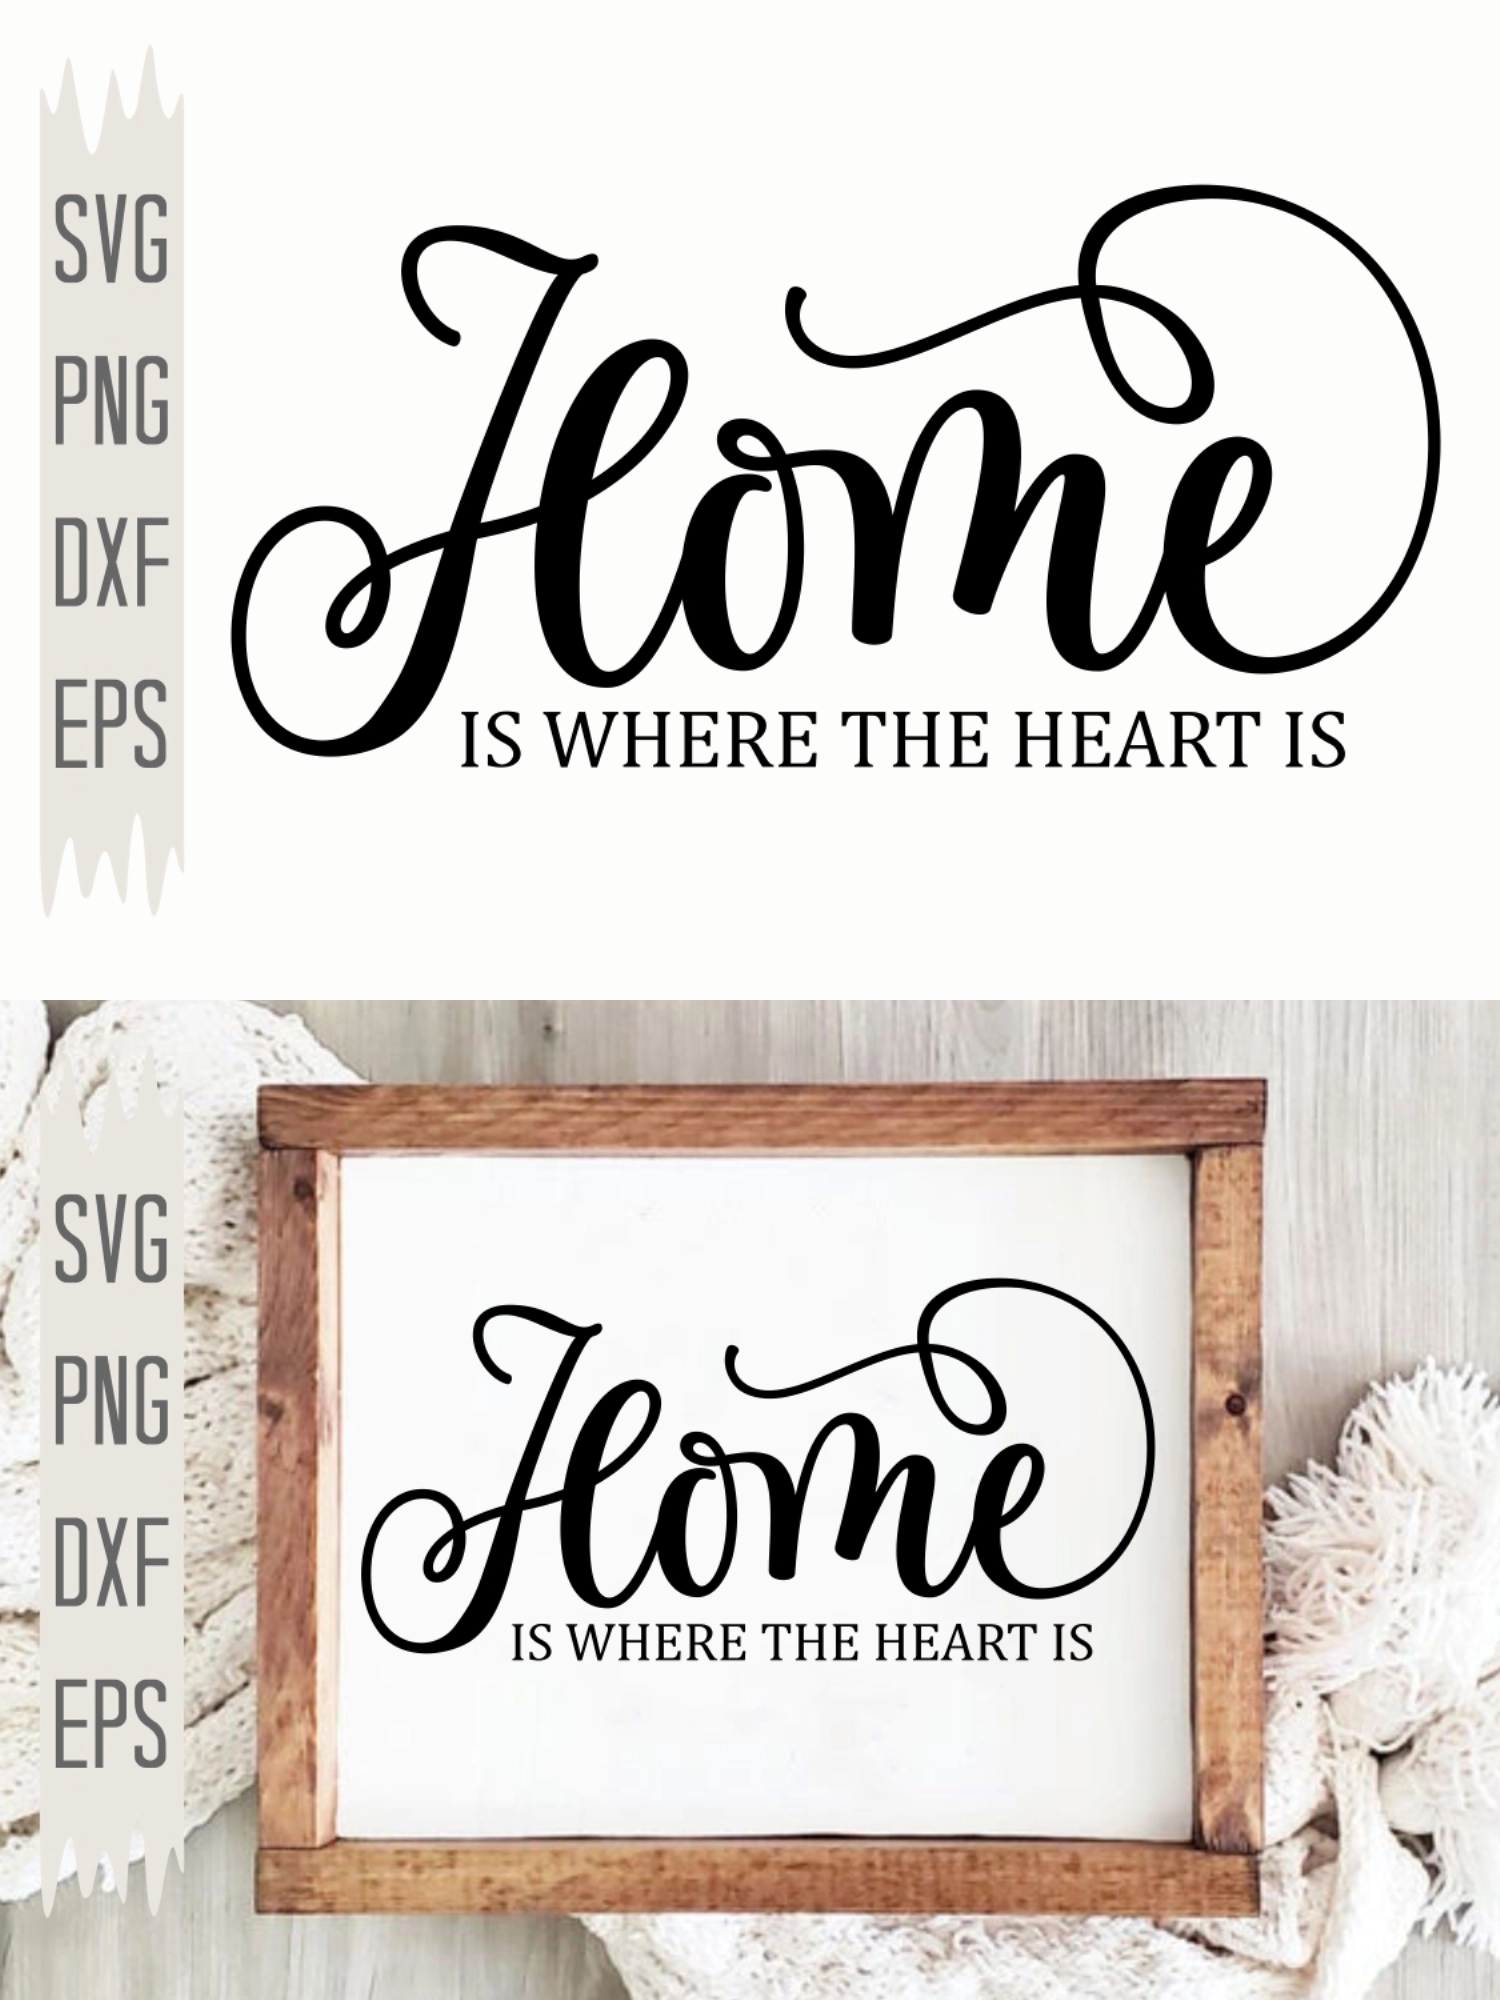 Home is Where the Heart Is SVG, Family SVG, Family quote,Home Decor Svg,  Png, Eps, Dxf, Cricut, Cut Files, Silhouette Files, Download, Print